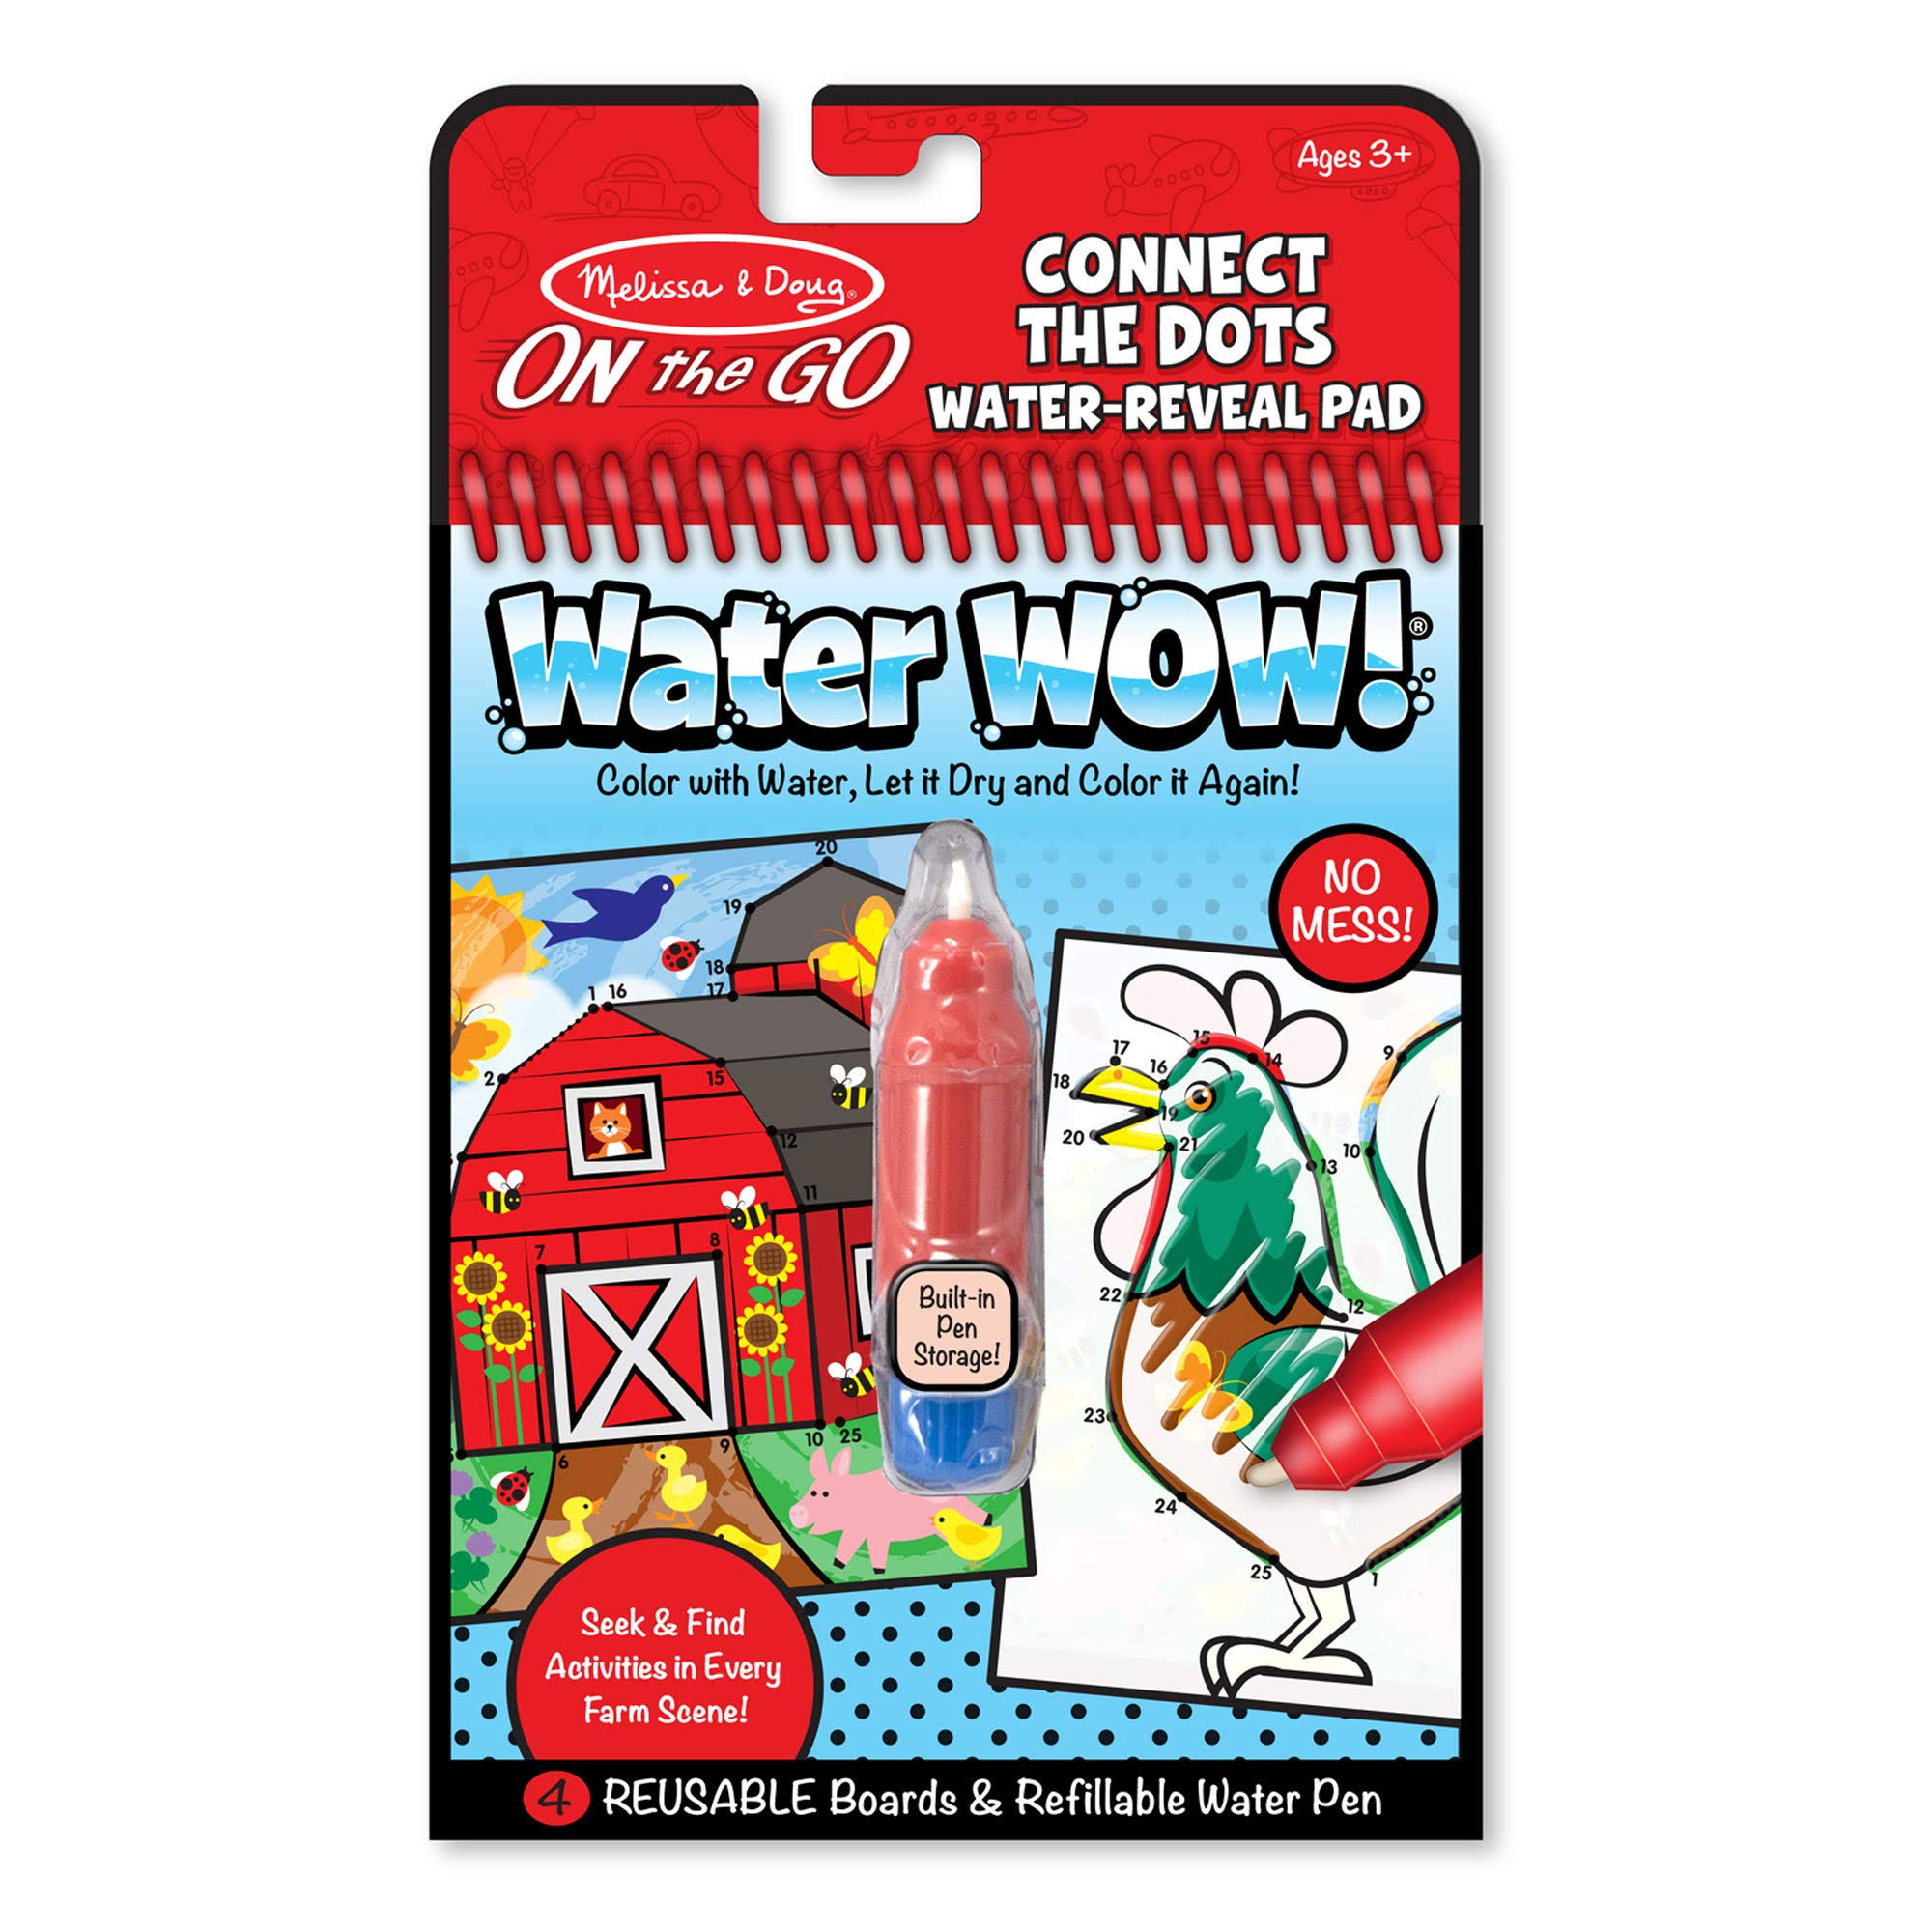 Melissa & Doug On The Go Connect the Dots Water-Reveal Pad: Water Wow!